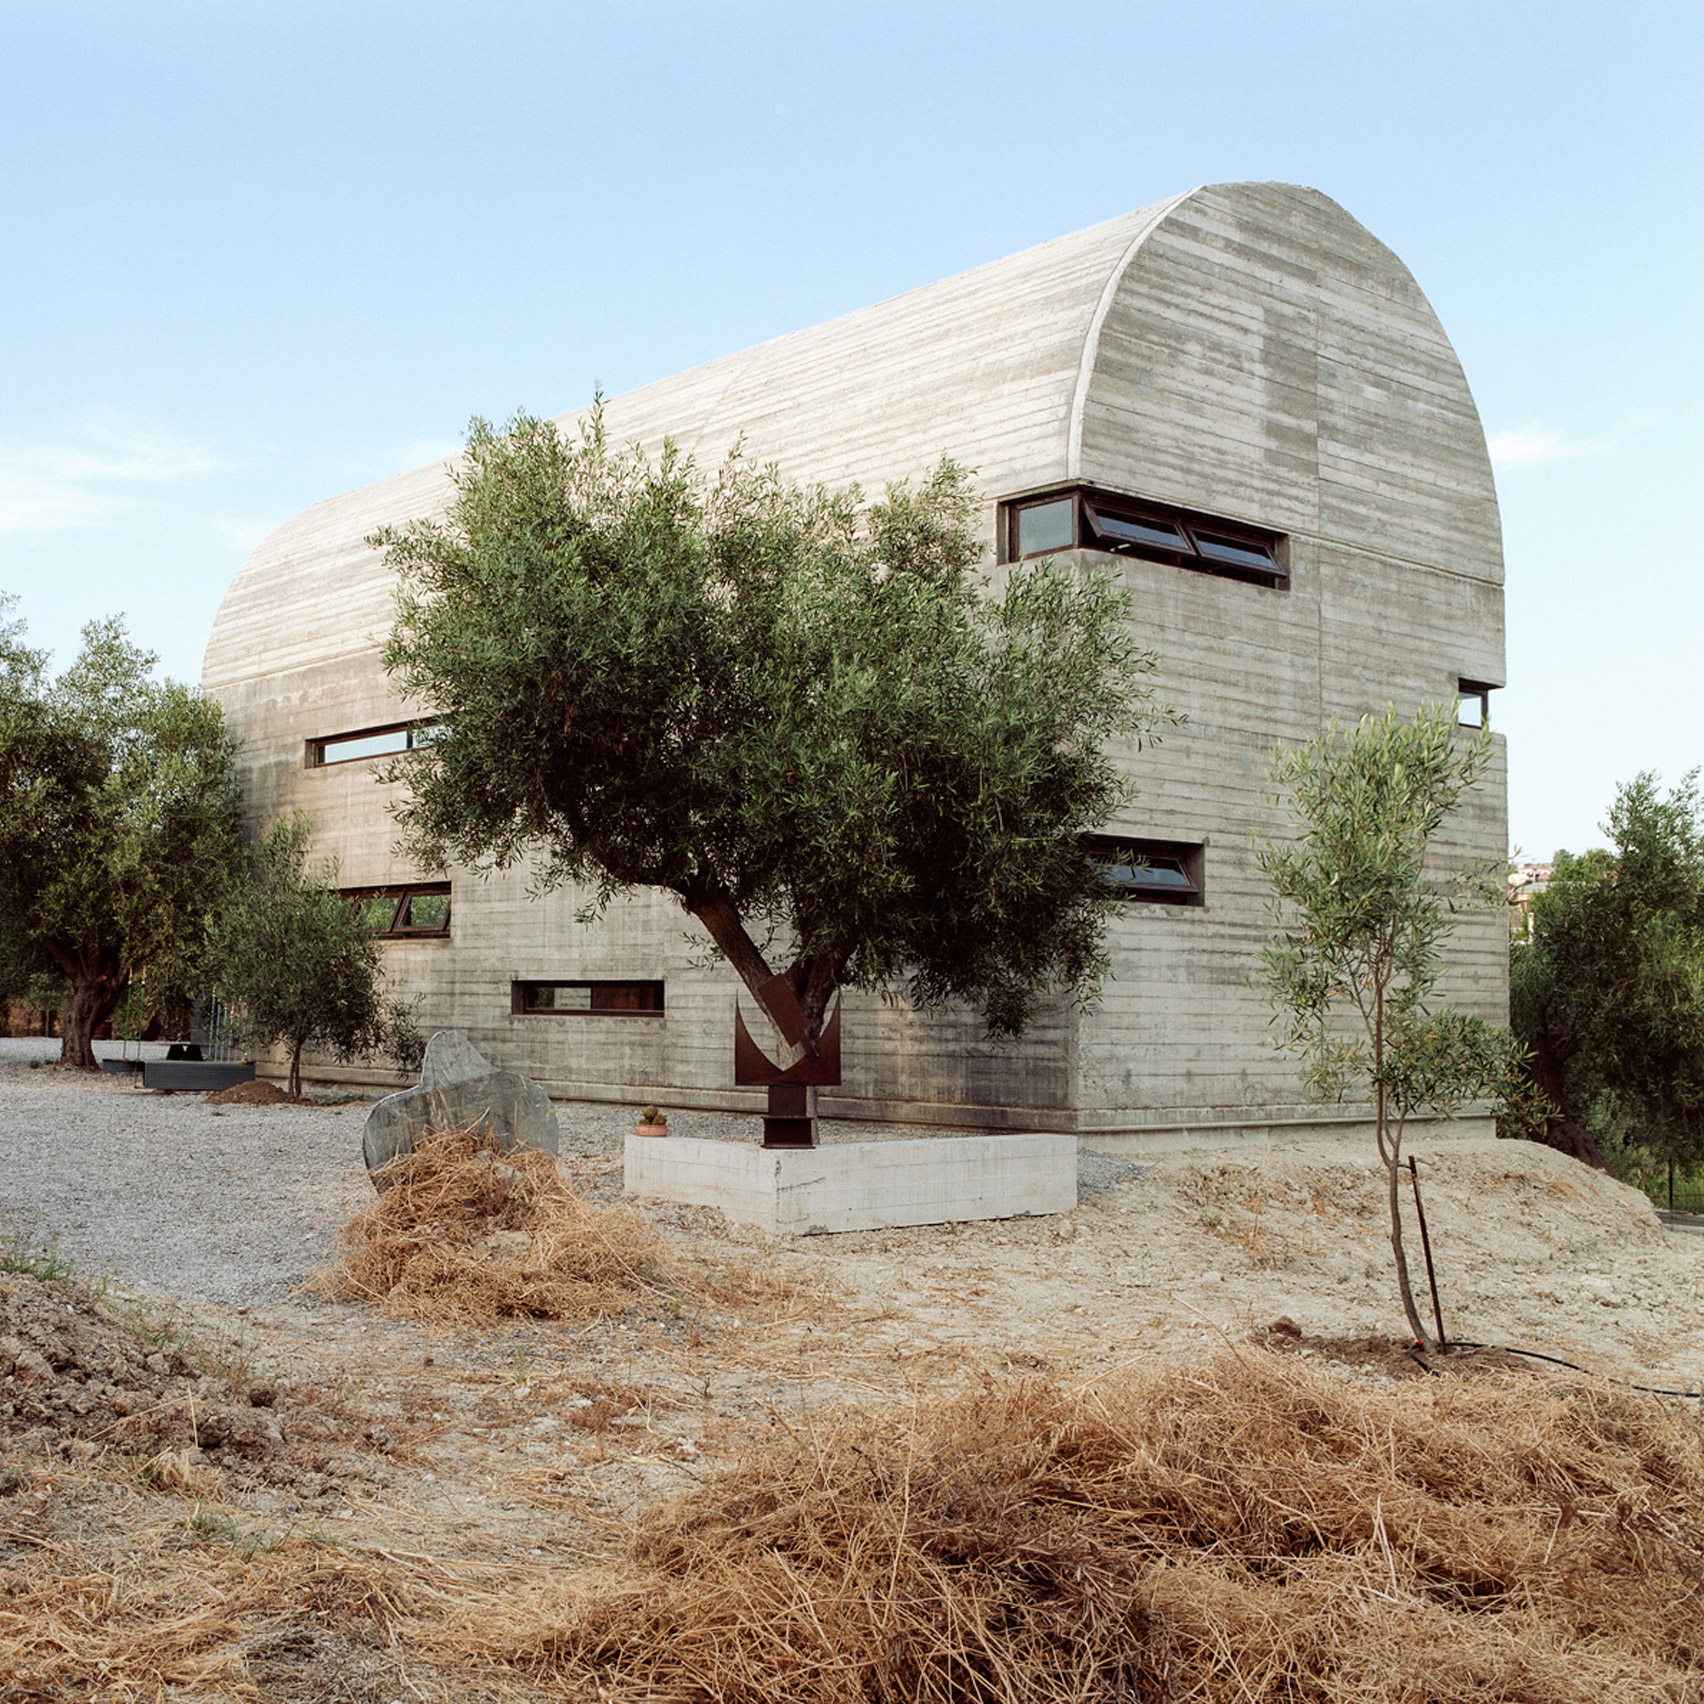 Exterior of Art Warehouse in Greece by A31 Architecture